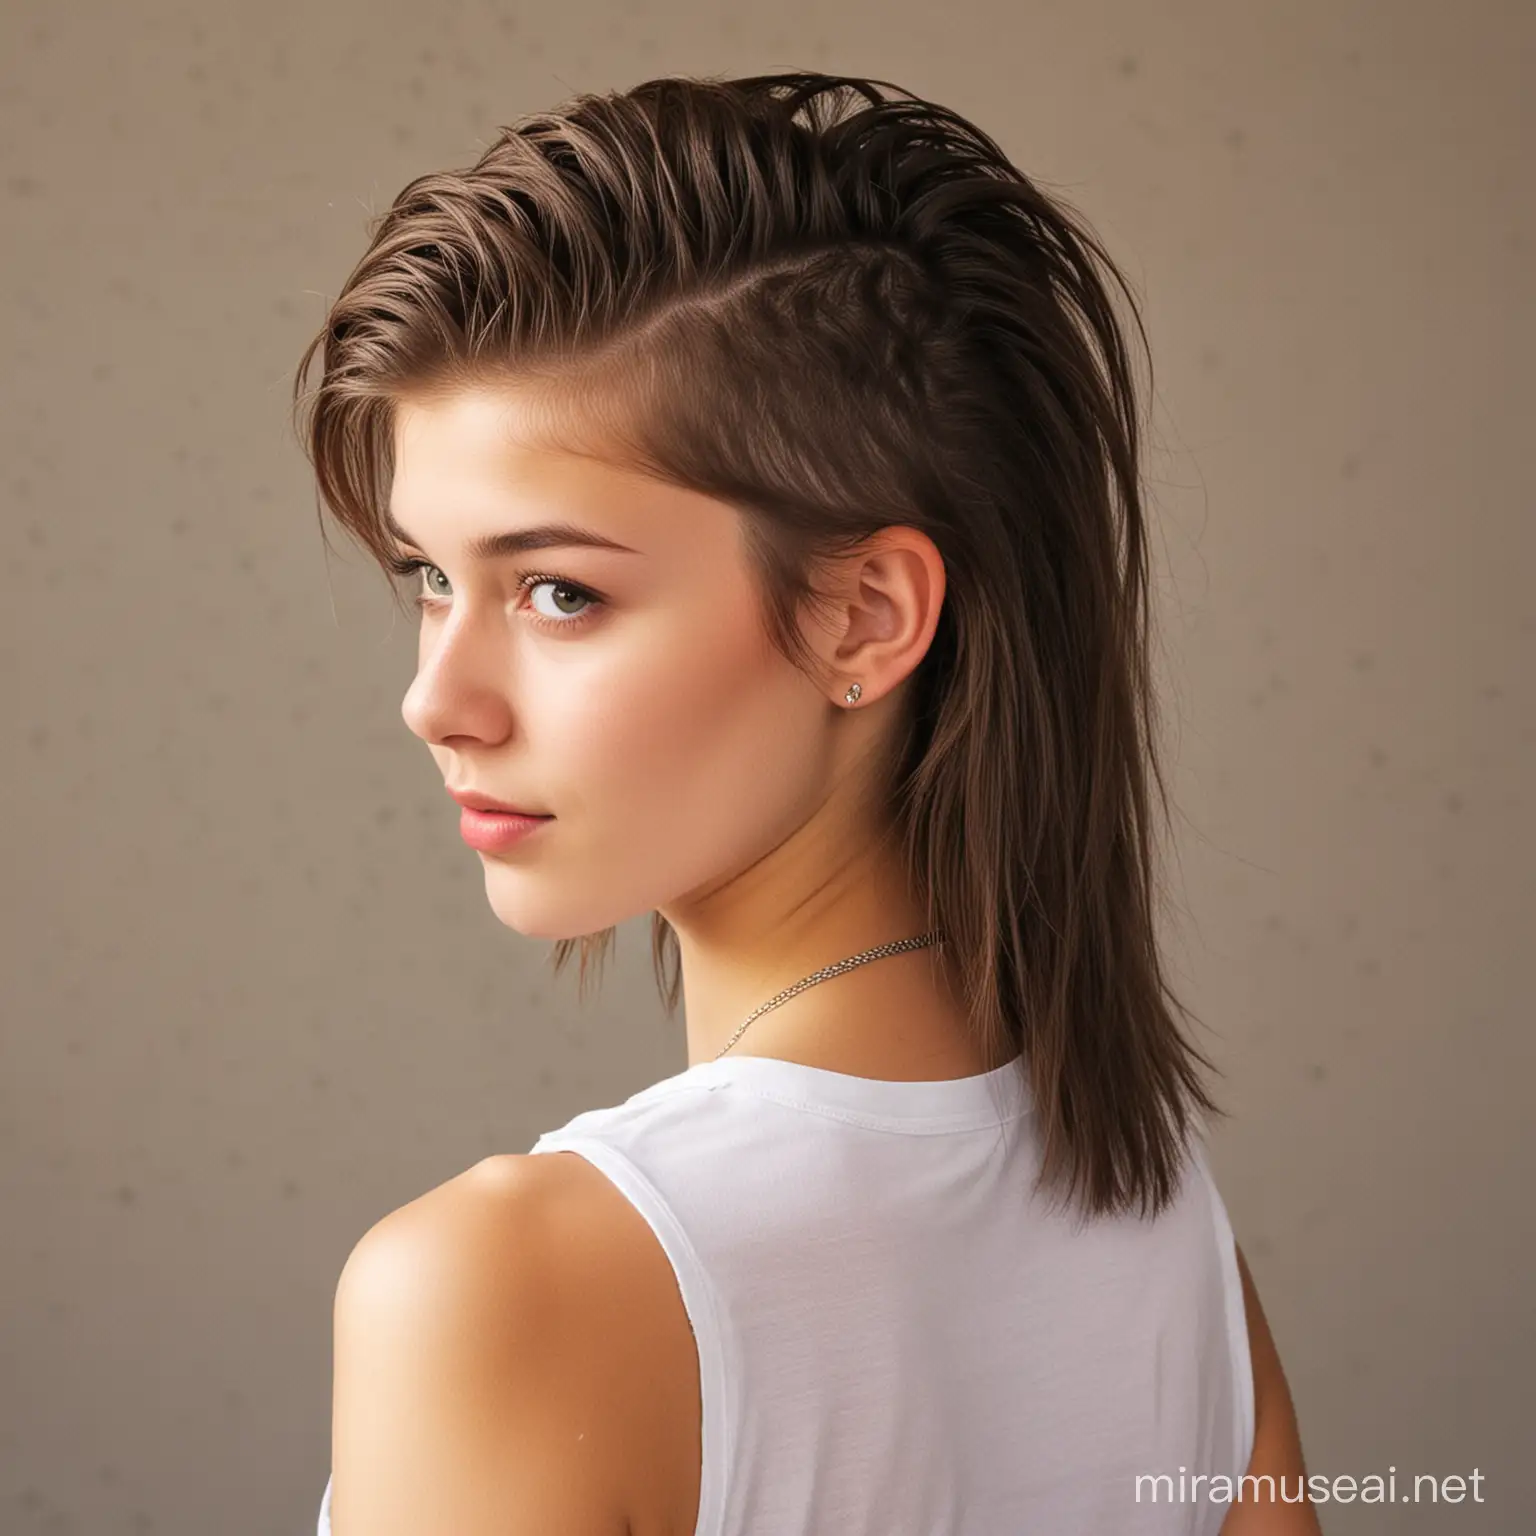 A gergeous girl. She is 18 years old. She has a mullet haircut